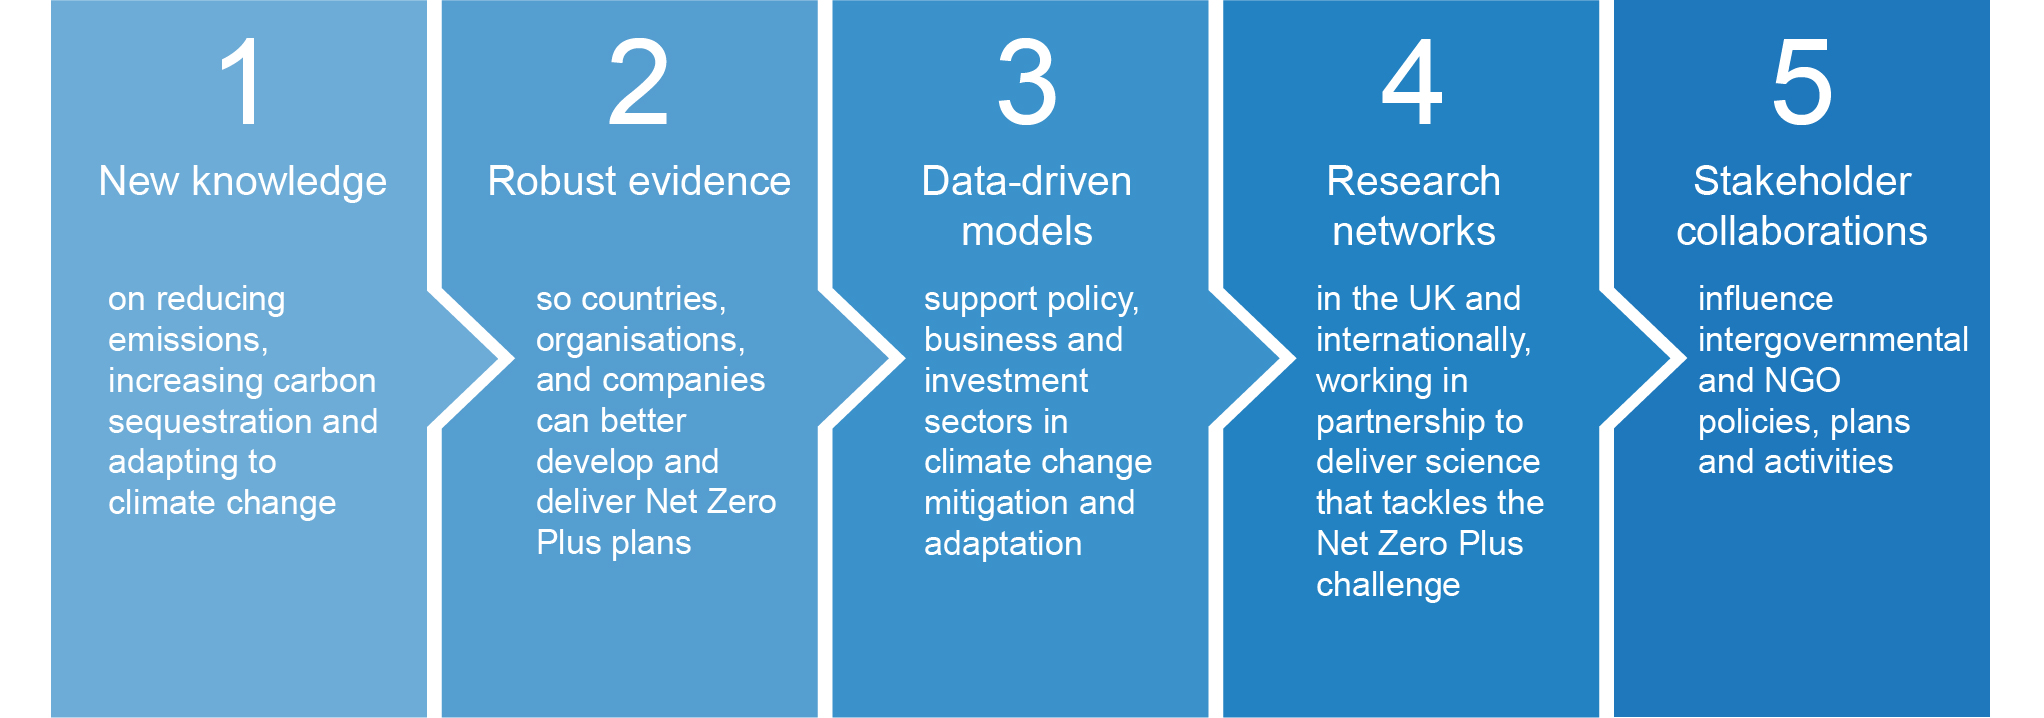 Flowchart describing 5 expected outcomes of the NC international project, including new knowledge, robust evidence, data-driven models, research networks and stakeholder collaborations